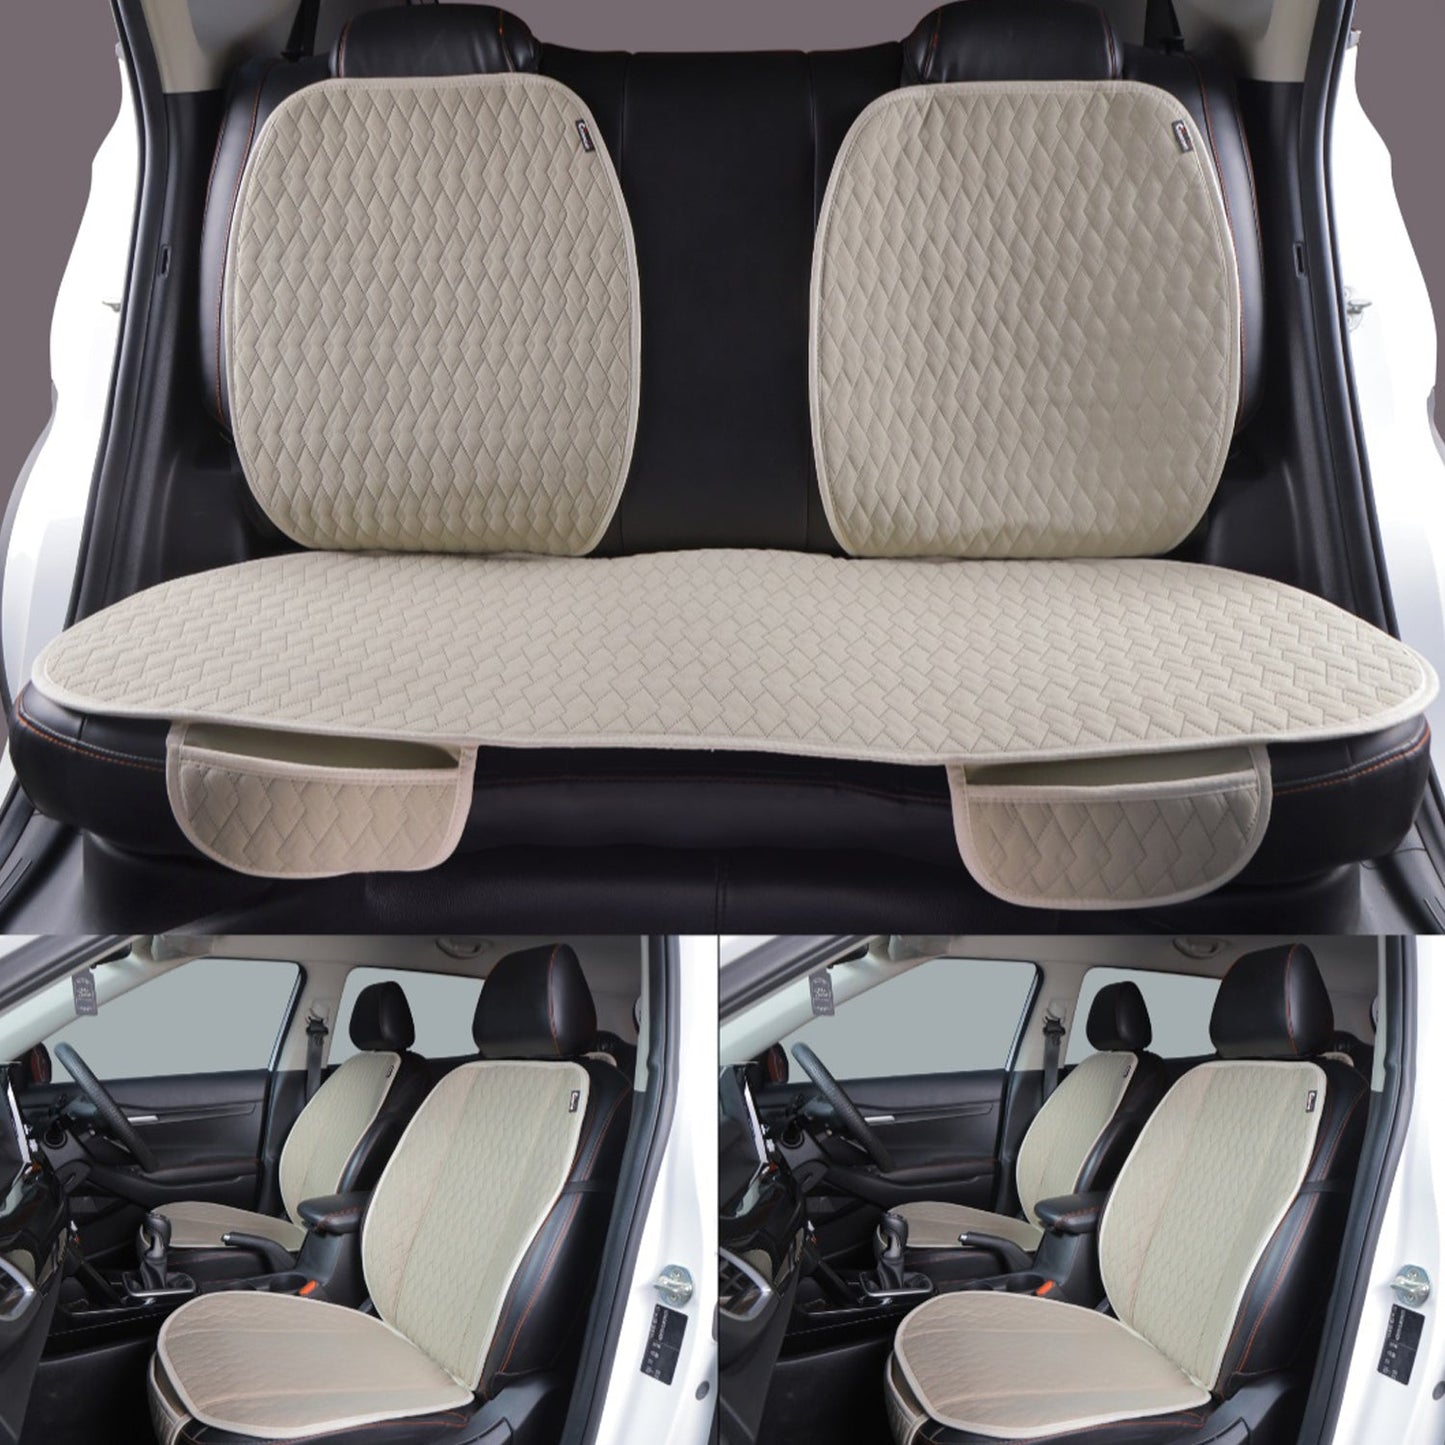 9386 Car Seat Cover Protector Front and Back Cushion Mat Breathable Non- Slip Interior Seats Cover- fit for Most Cars (5 Seater Set)